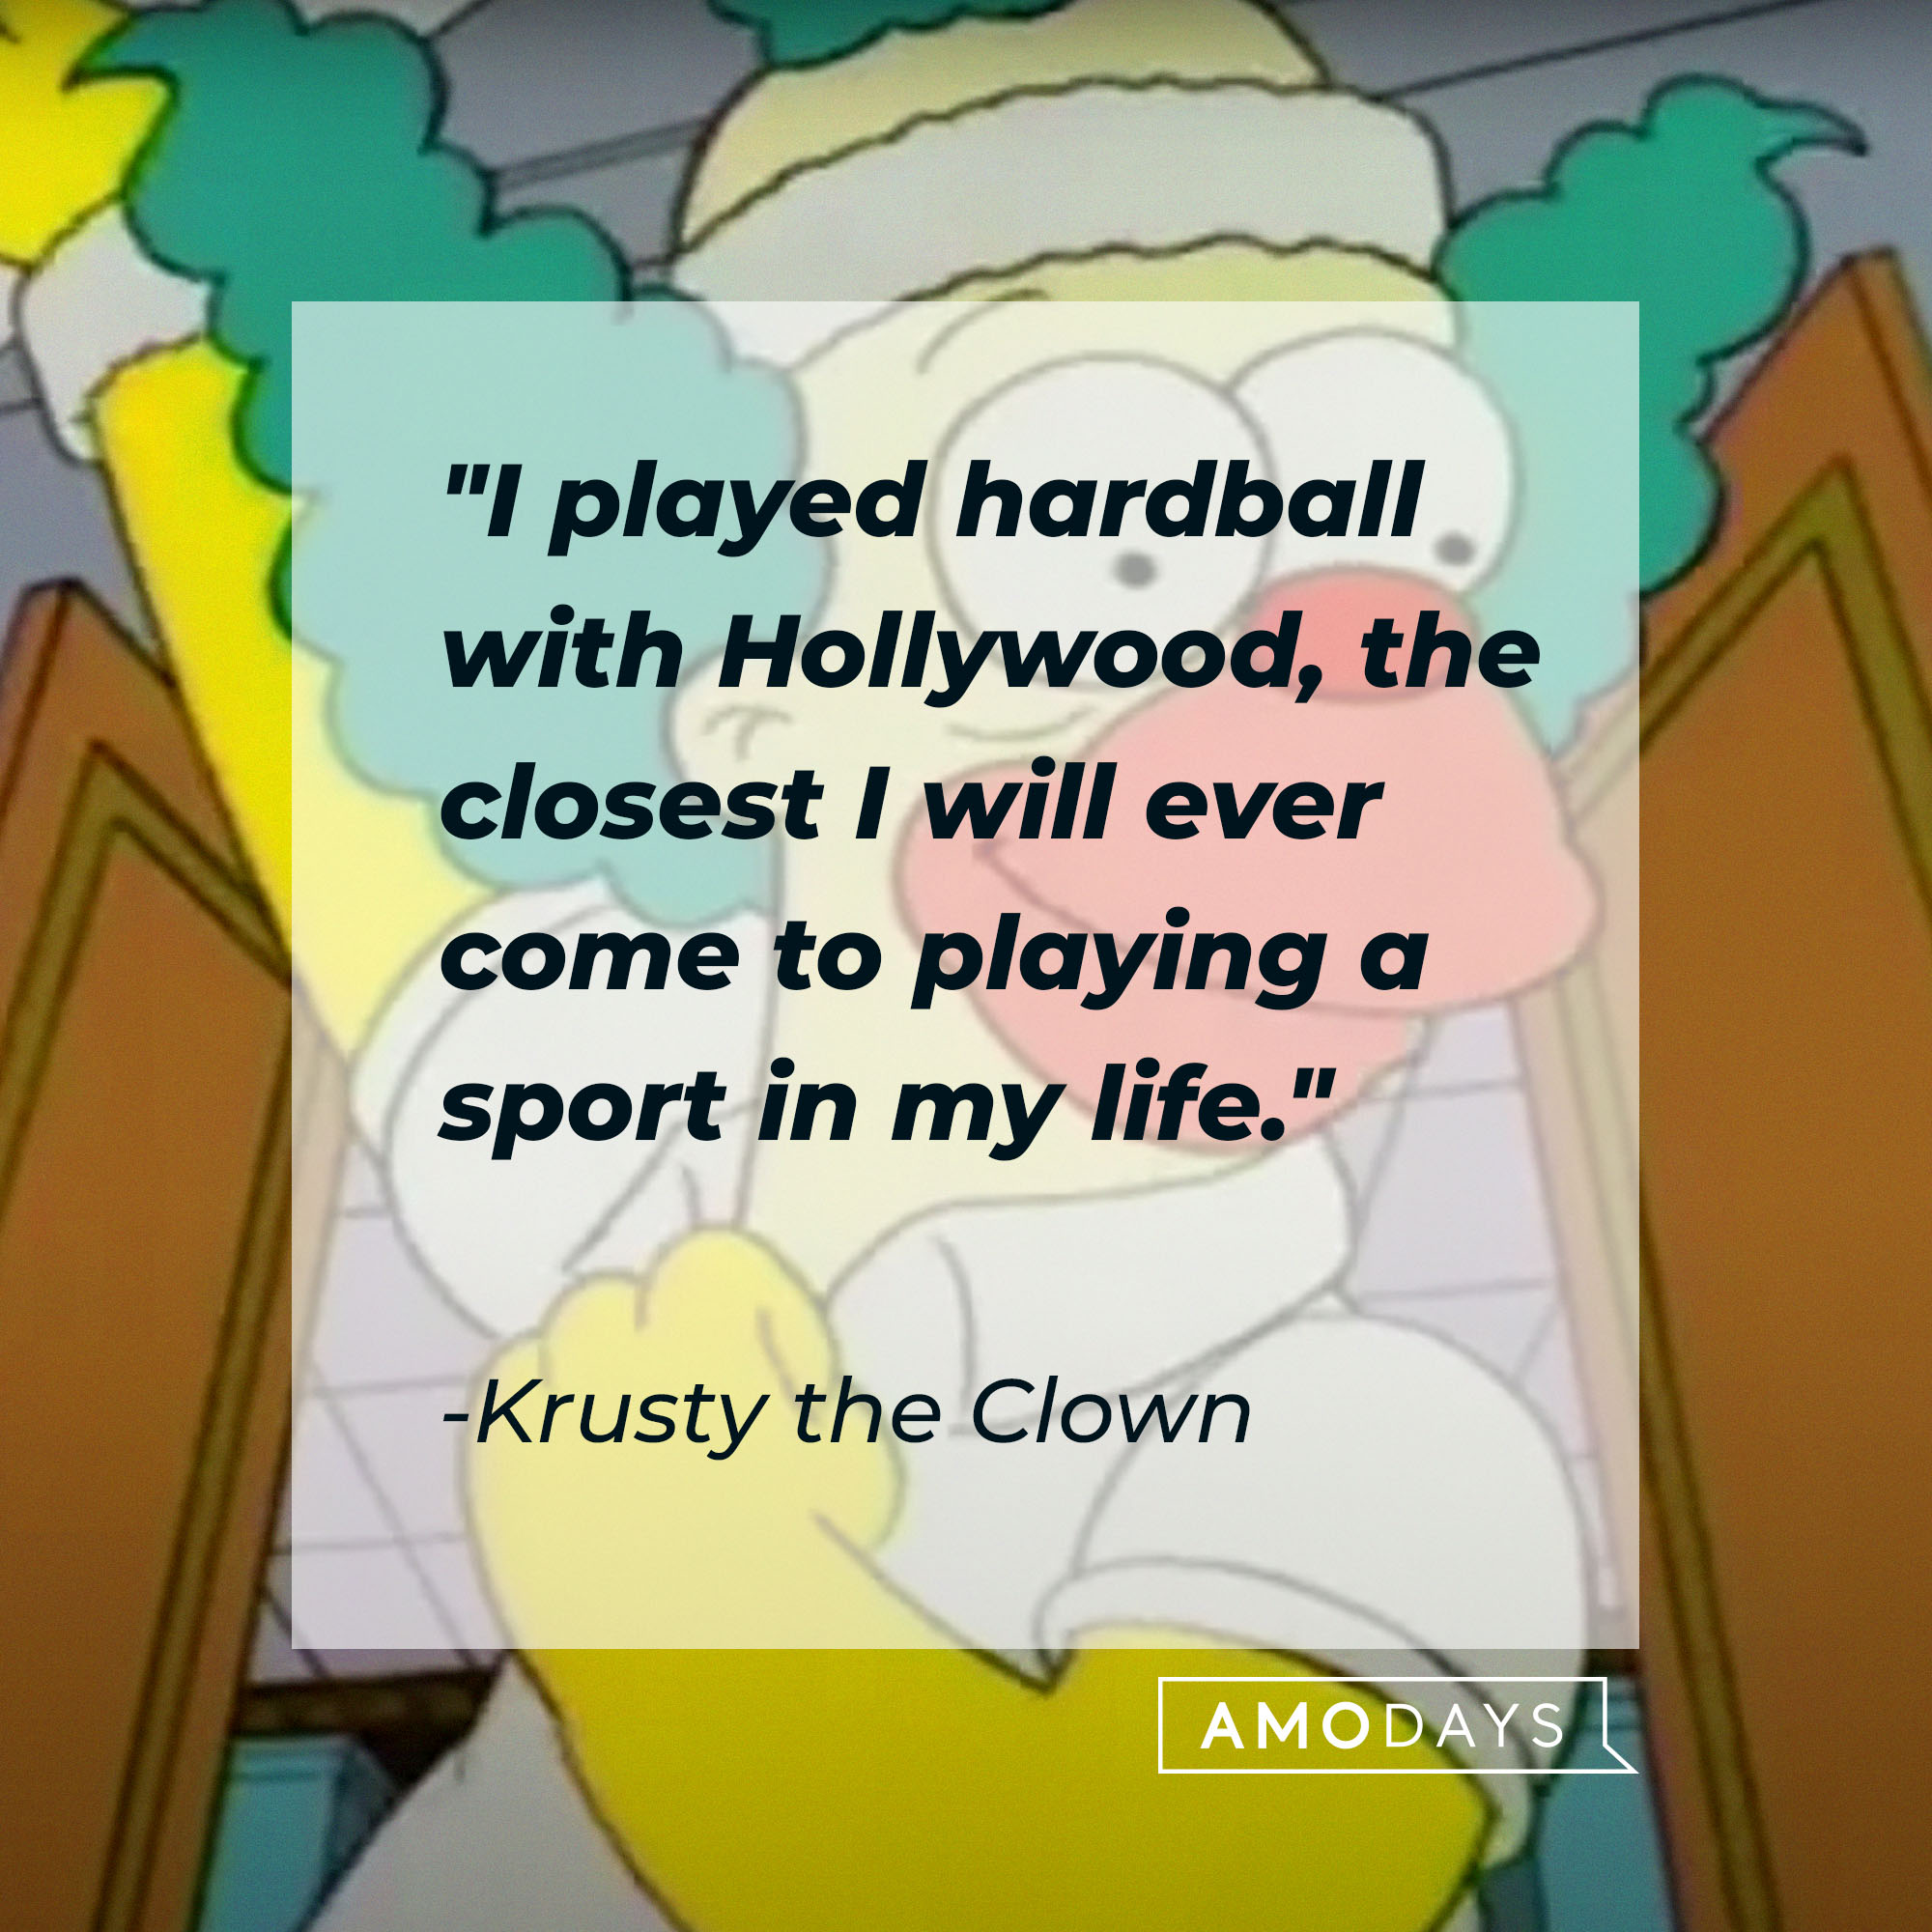 Krusty the Clown's quote: "I played handball with Hollywood, the closest I will ever come to playing a sport in my life" | Source: Facebook.com/TheSimpsons